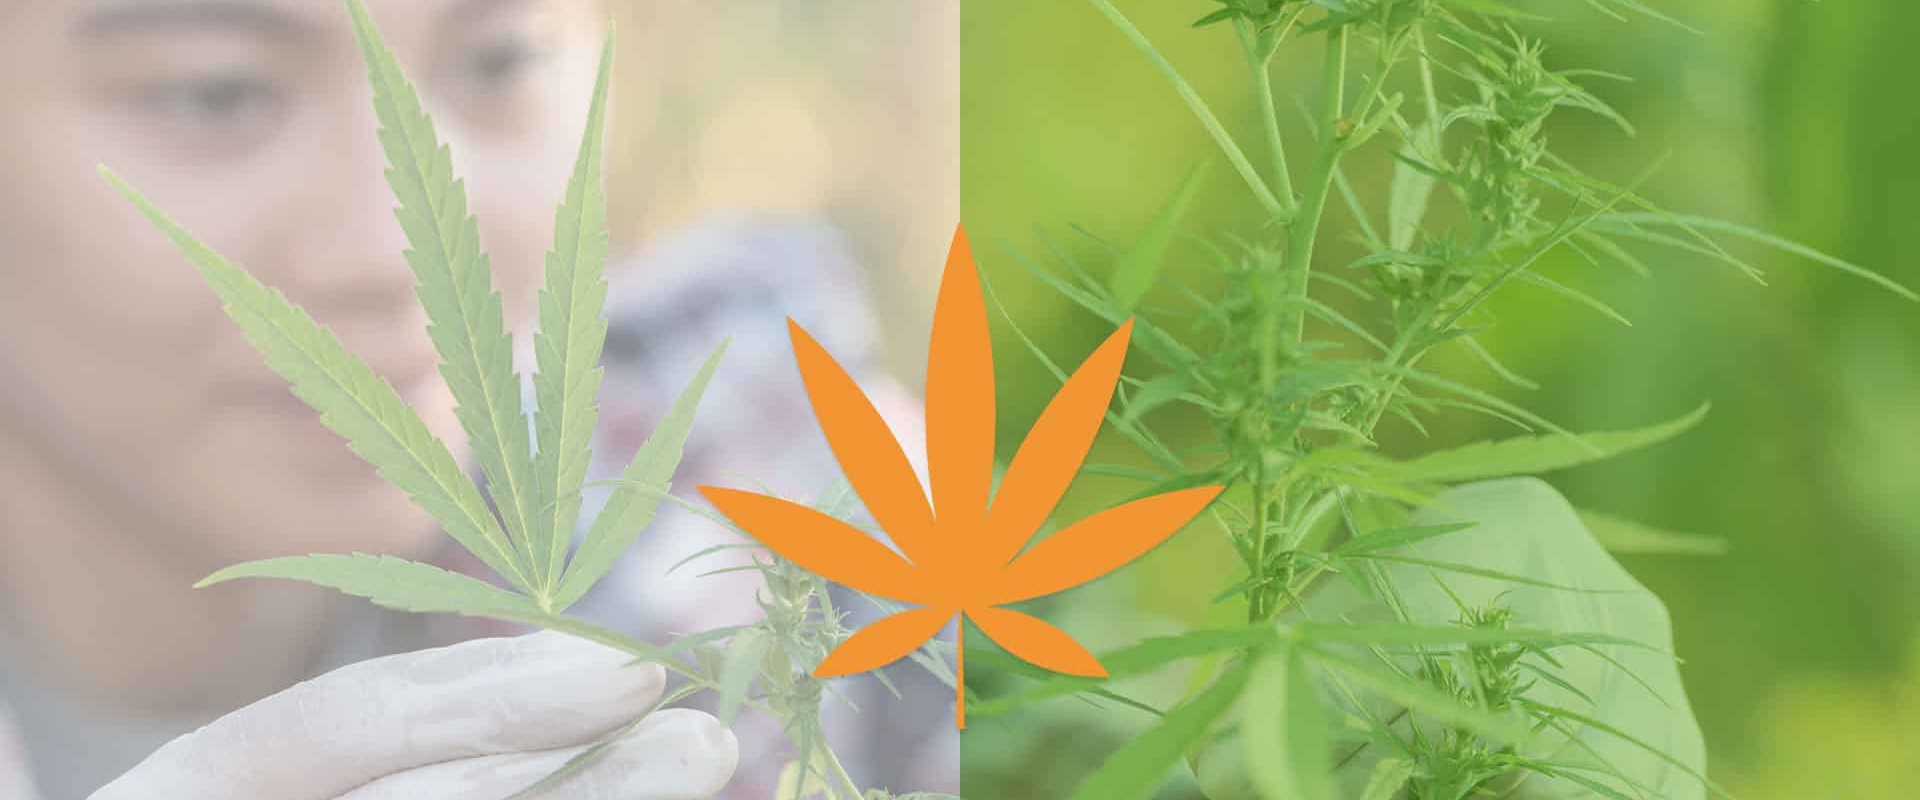 The Truth About CBD: Natural vs Synthetic - An Expert's Perspective